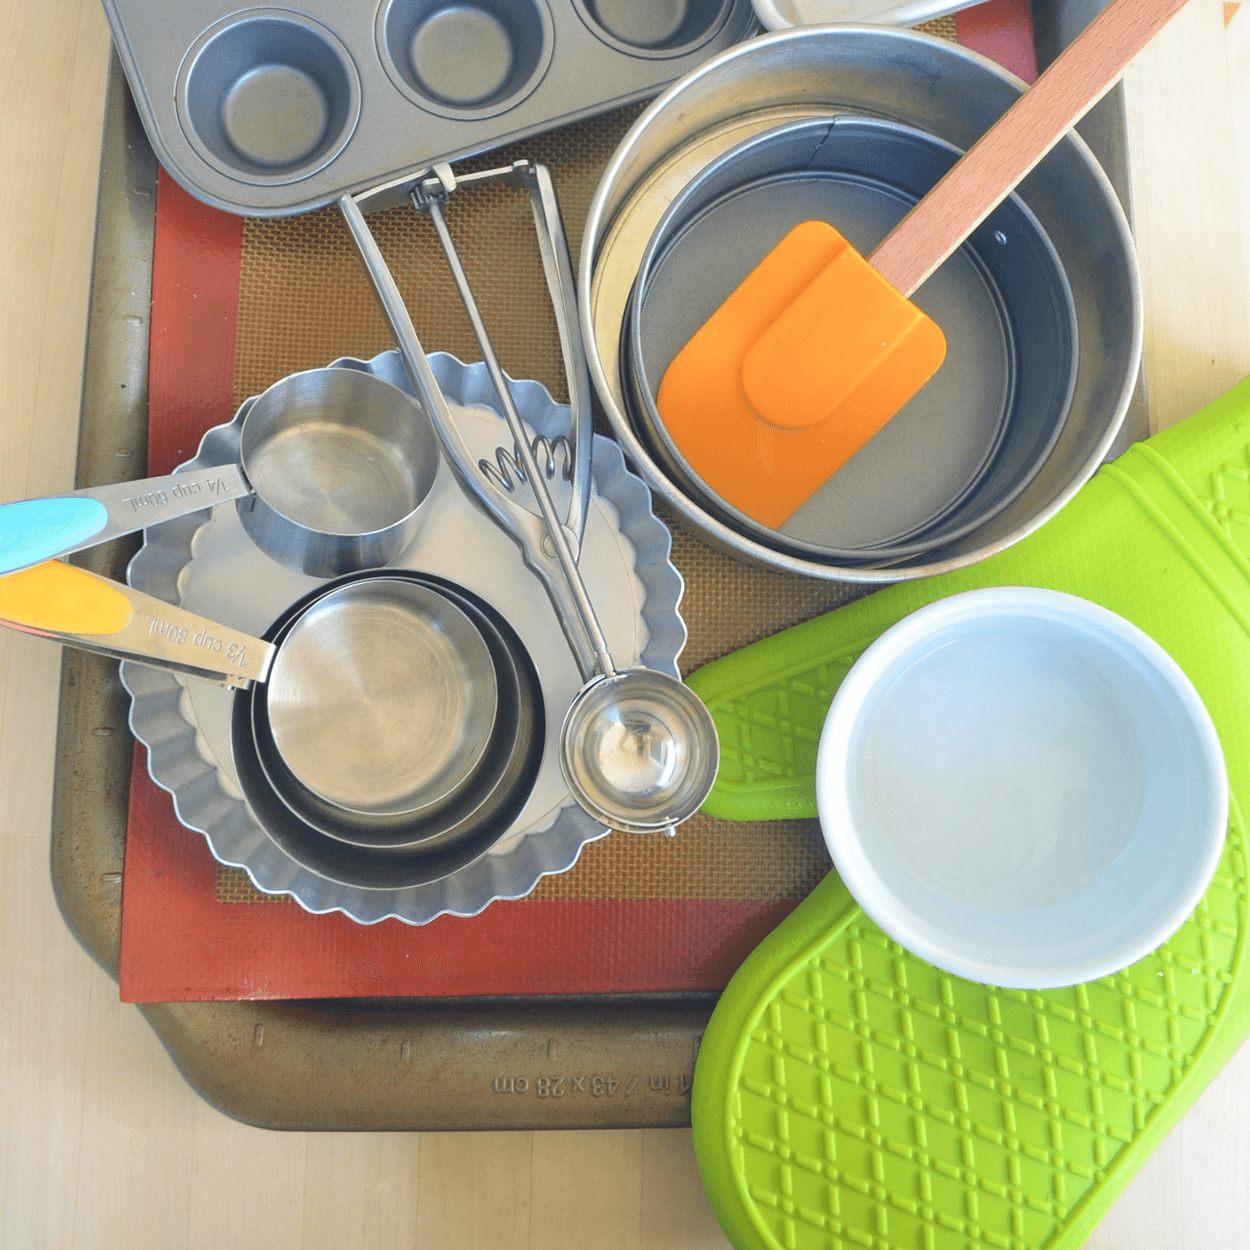 Kitchenware and Baking Accessories